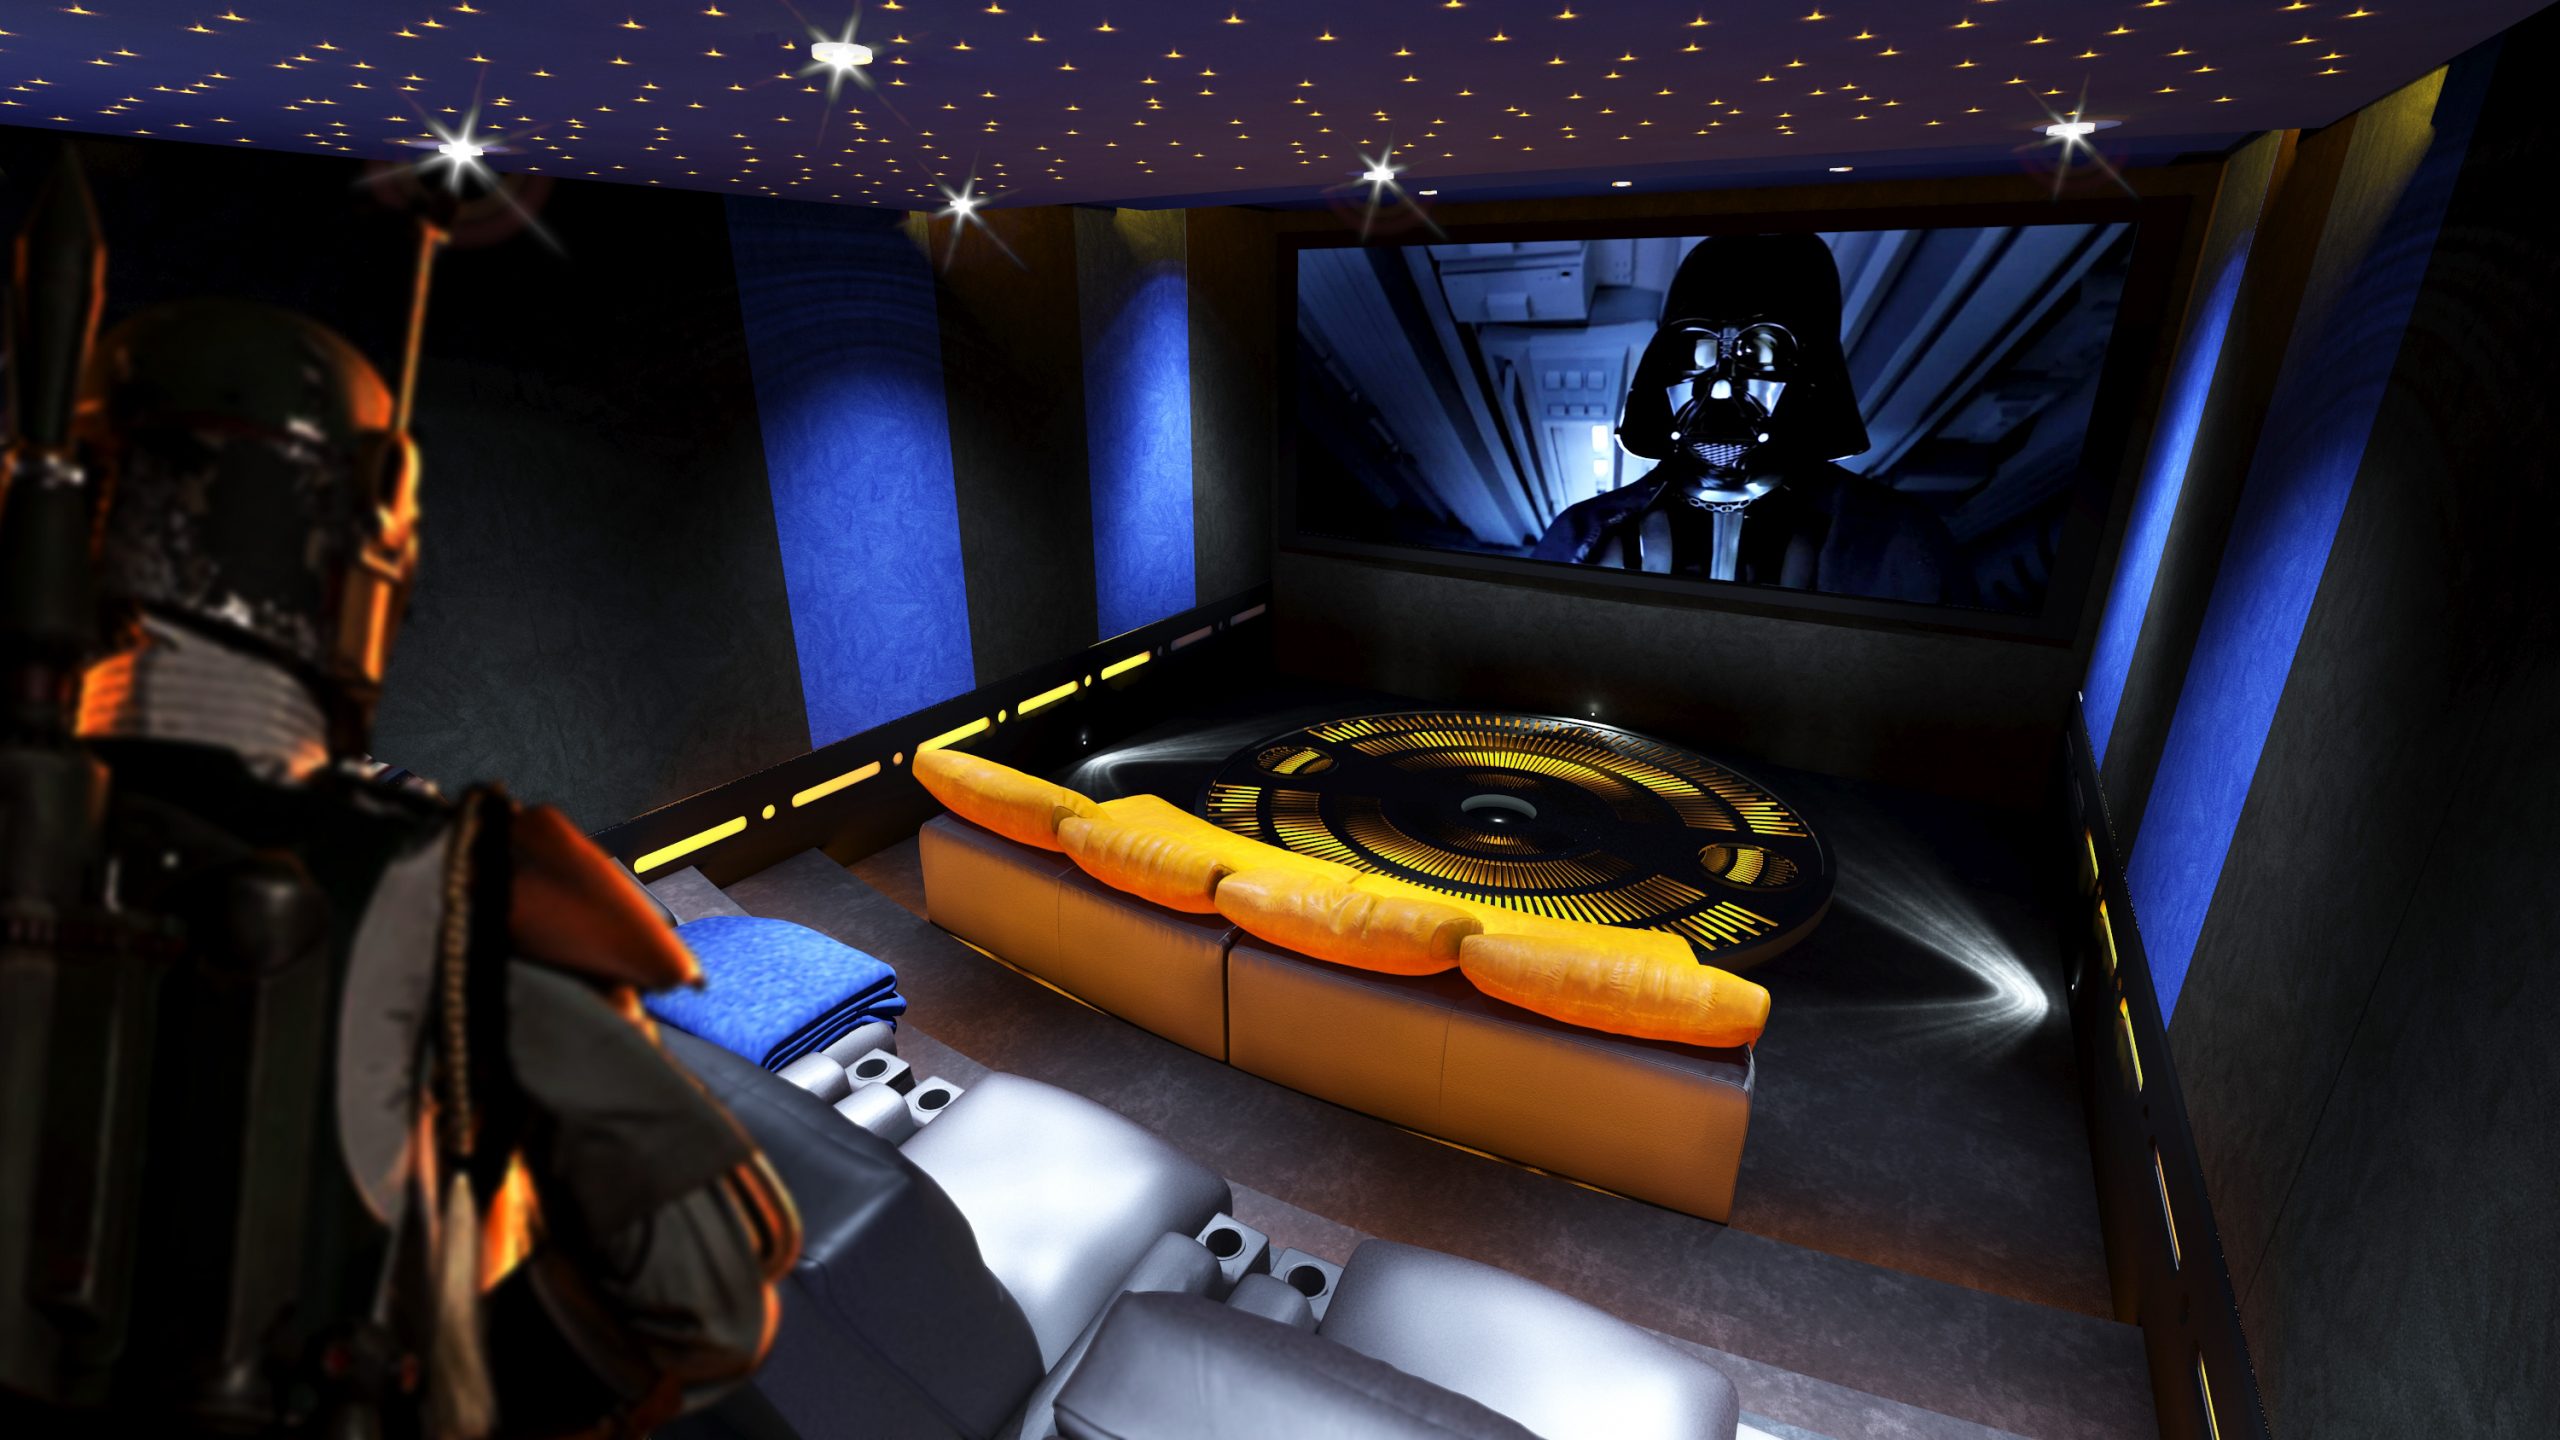 Image shows view from rear of star wars style cinema, towards the screen. Home cinema lighting, seating and acoustic treatment.